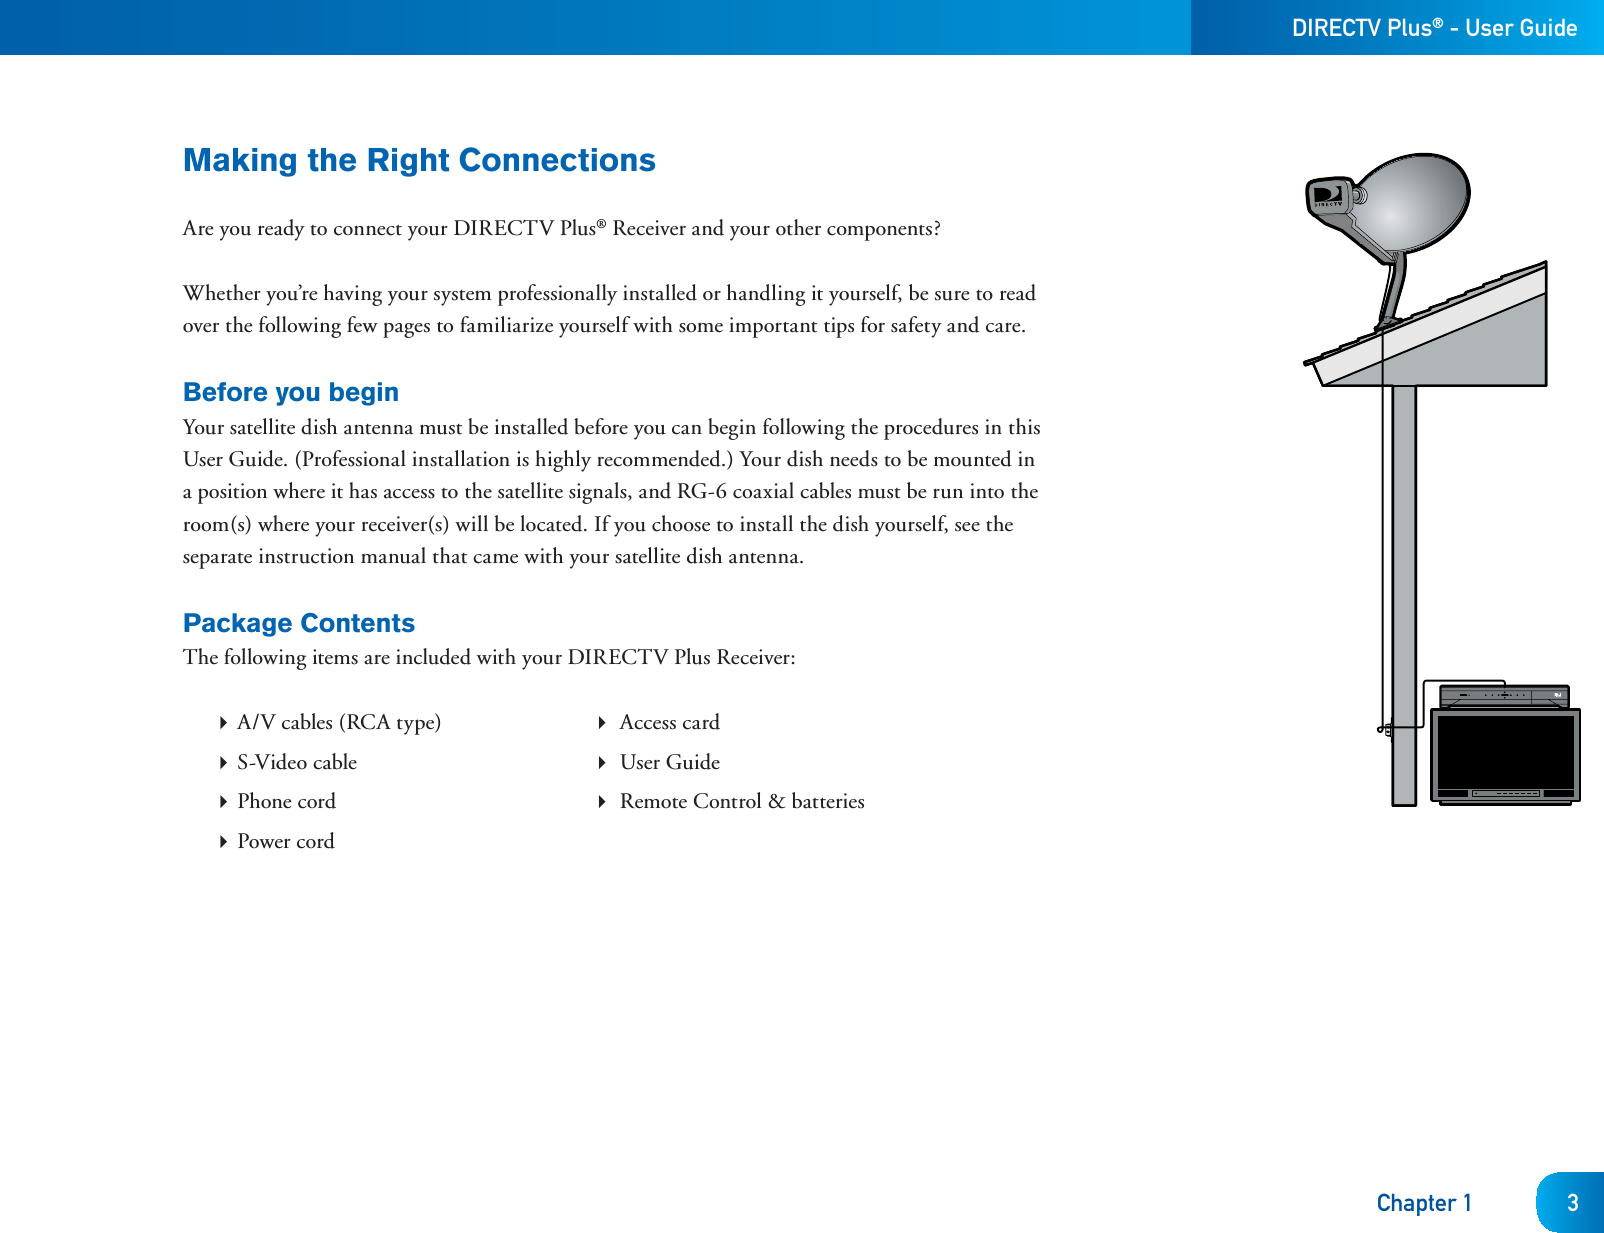 DIRECTV Plus® - User GuideChapter 1 3Making the Right ConnectionsAre you ready to connect your DIRECTV Plus® Receiver and your other components? Whether you’re having your system professionally installed or handling it yourself, be sure to read over the following few pages to familiarize yourself with some important tips for safety and care.Before you beginYour satellite dish antenna must be installed before you can begin following the procedures in this User Guide. (Professional installation is highly recommended.) Your dish needs to be mounted in a position where it has access to the satellite signals, and RG-6 coaxial cables must be run into the room(s) where your receiver(s) will be located. If you choose to install the dish yourself, see the separate instruction manual that came with your satellite dish antenna. Package ContentsThe following items are included with your DIRECTV Plus Receiver: A/V cables (RCA type)   Access card S-Video cable   User Guide Phone cord   Remote Control &amp; batteries Power cord